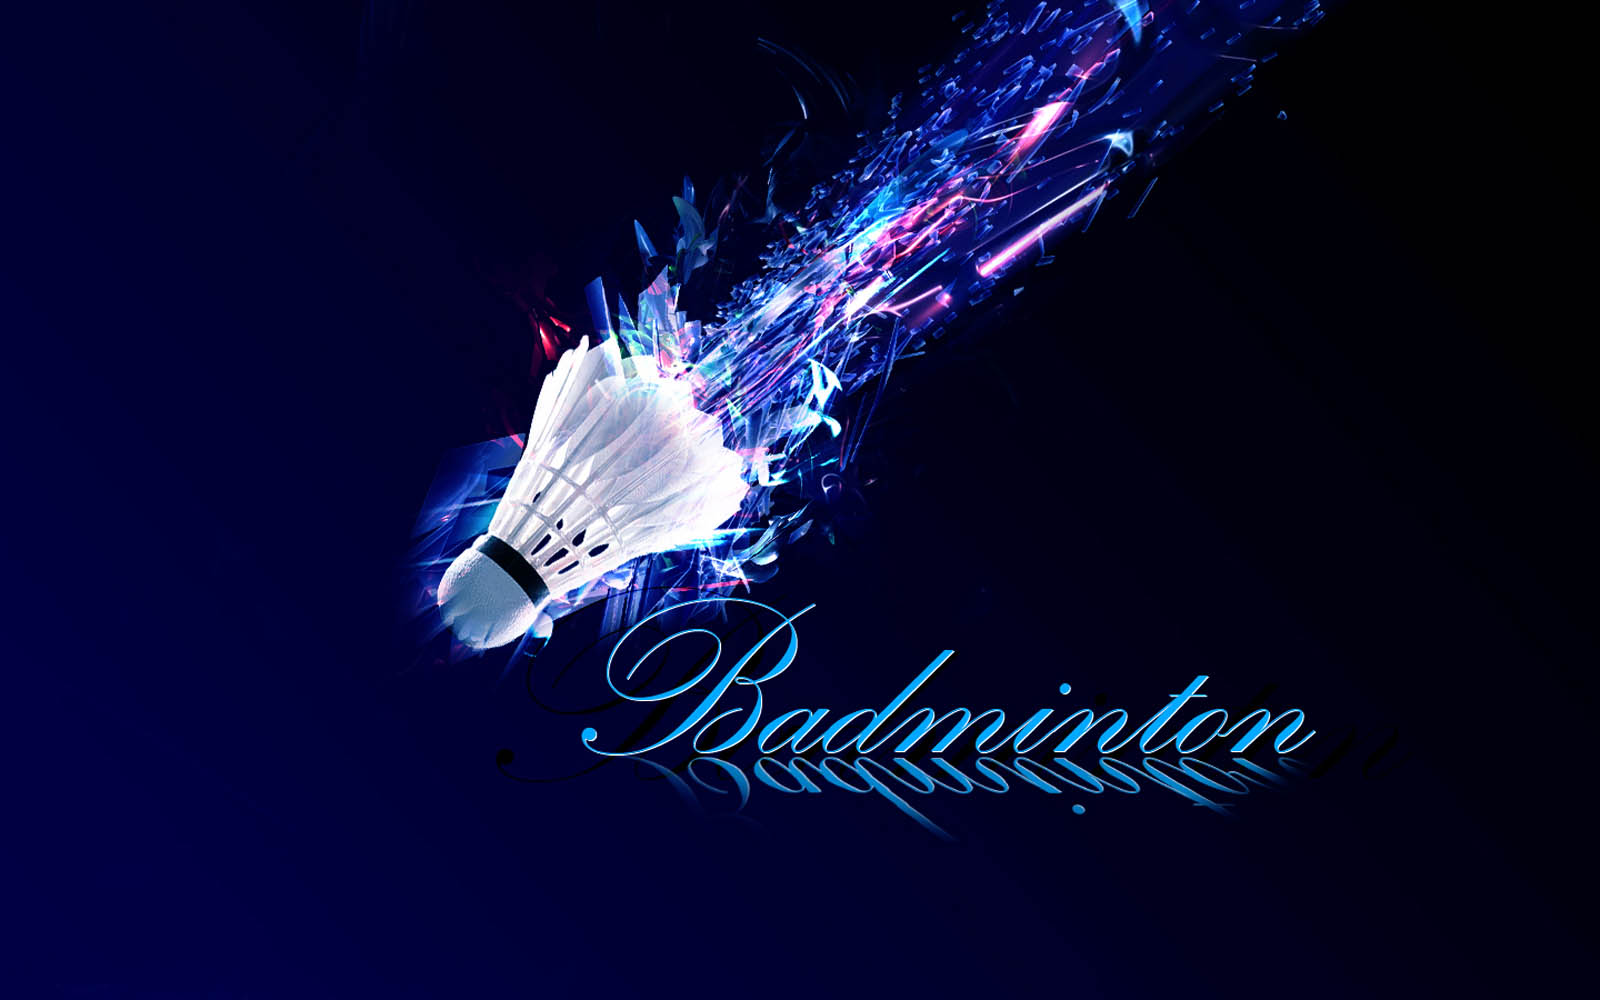 Tag Badminton Wallpapers Backgrounds PhotosImages and Pictures for